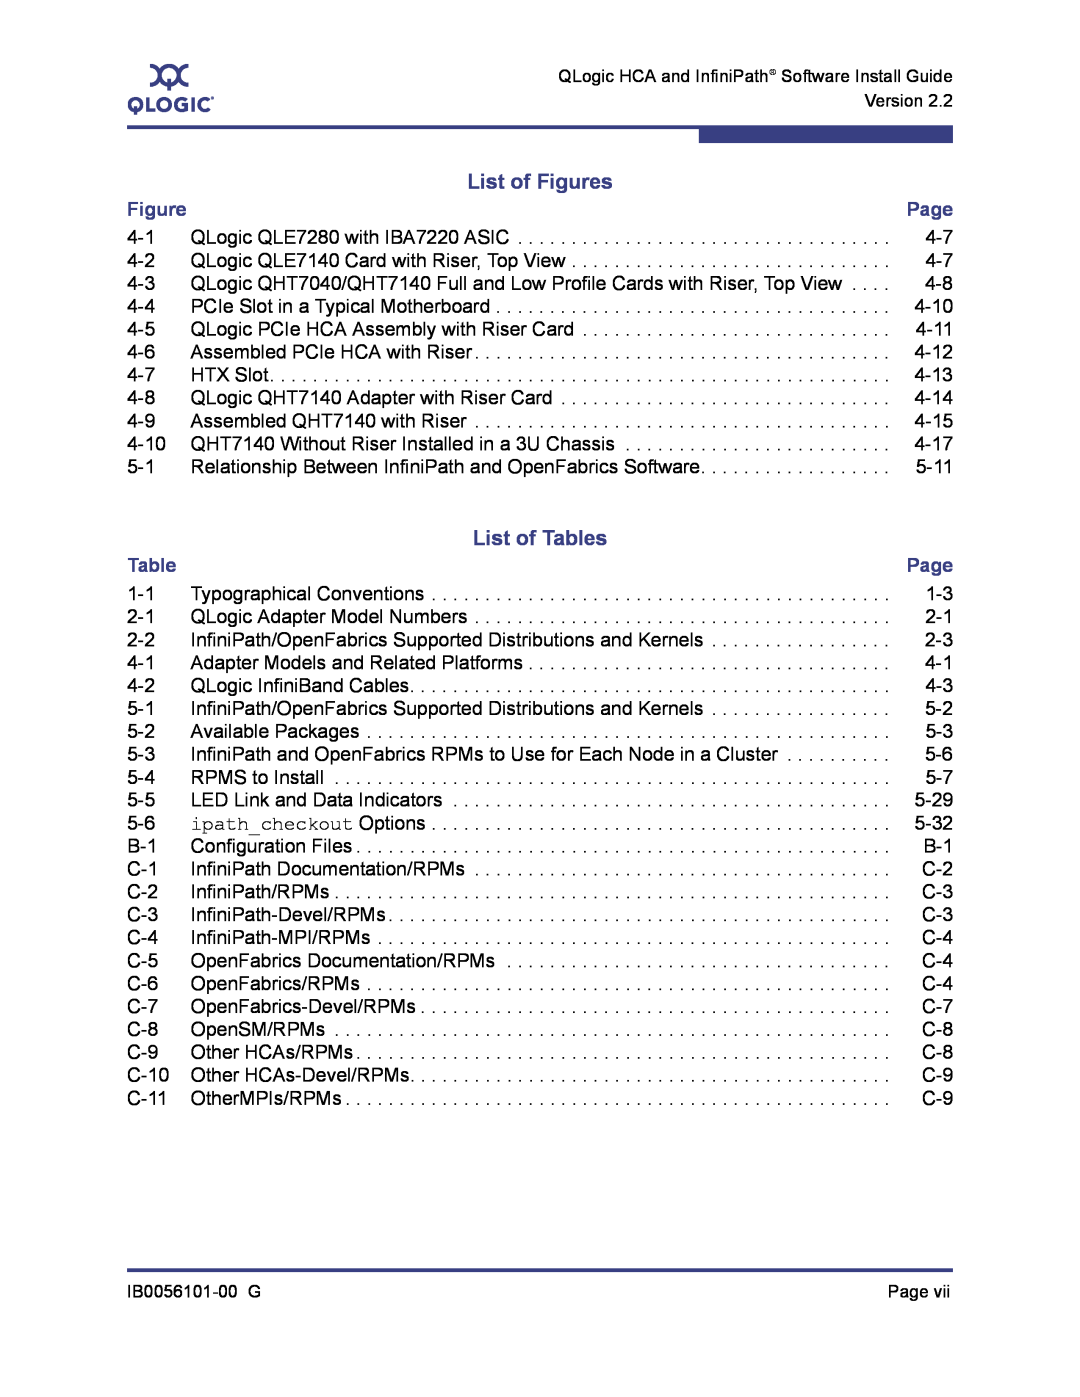 Q-Logic IB0056101-00 G manual List of Figures, List of Tables, Page 